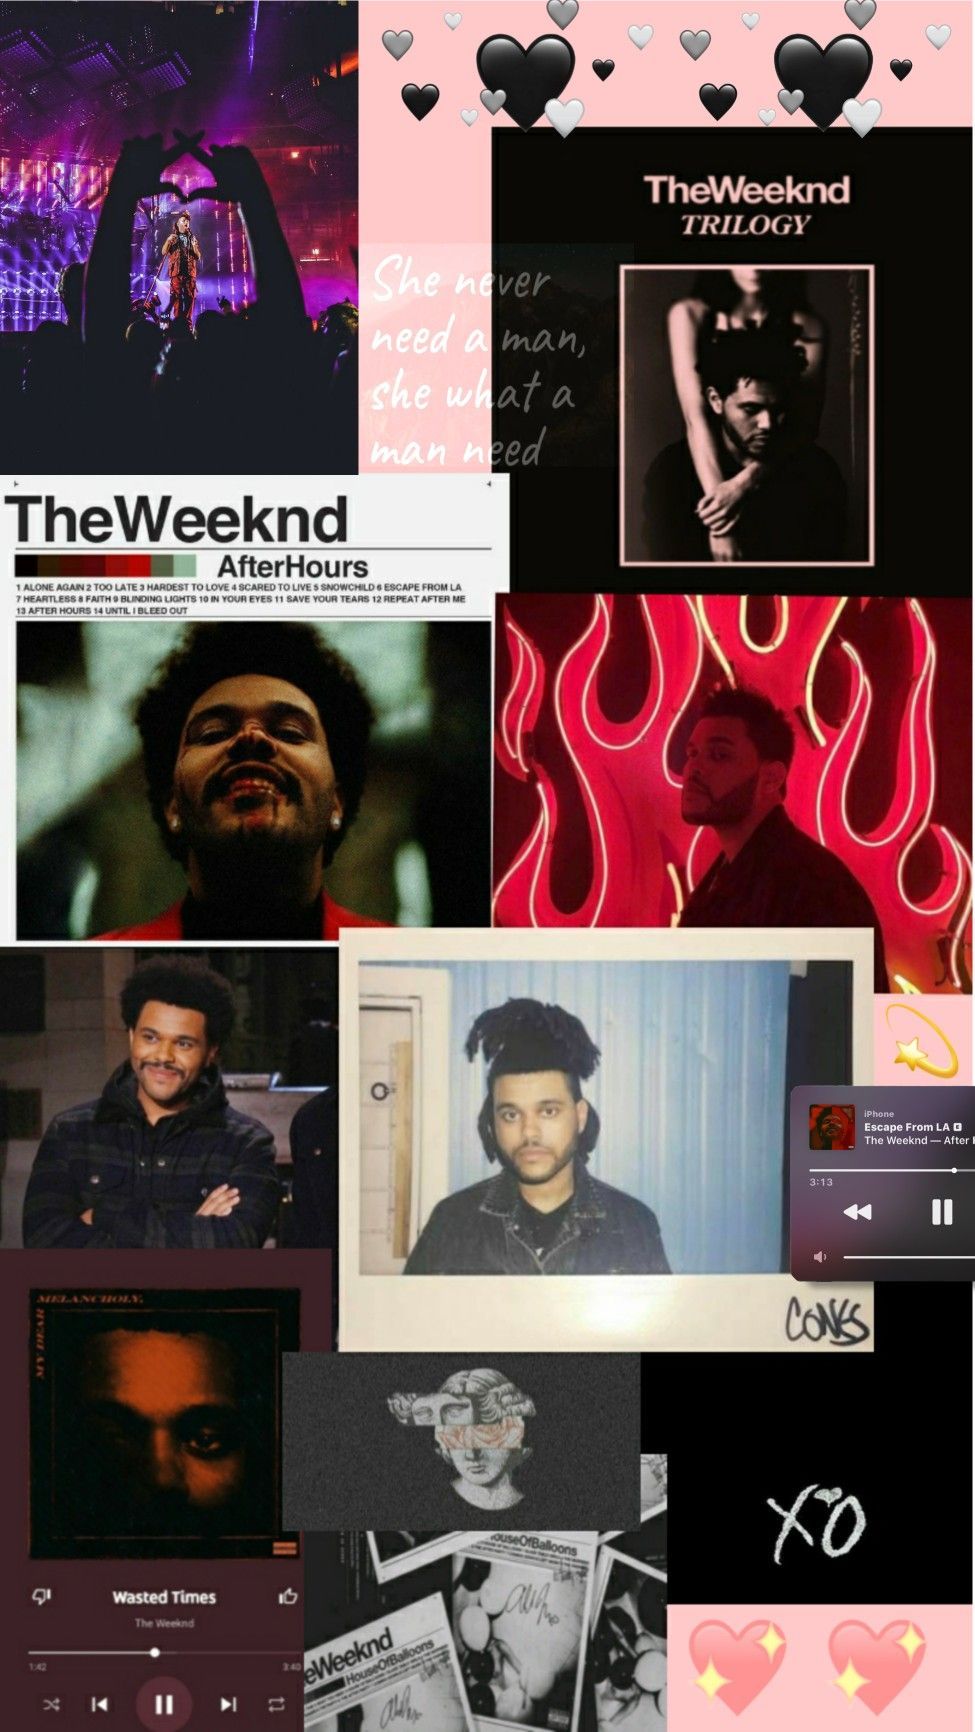 The weeknd wallpaper iphone. The weeknd wallpaper iphone, The weeknd background, The weeknd poster